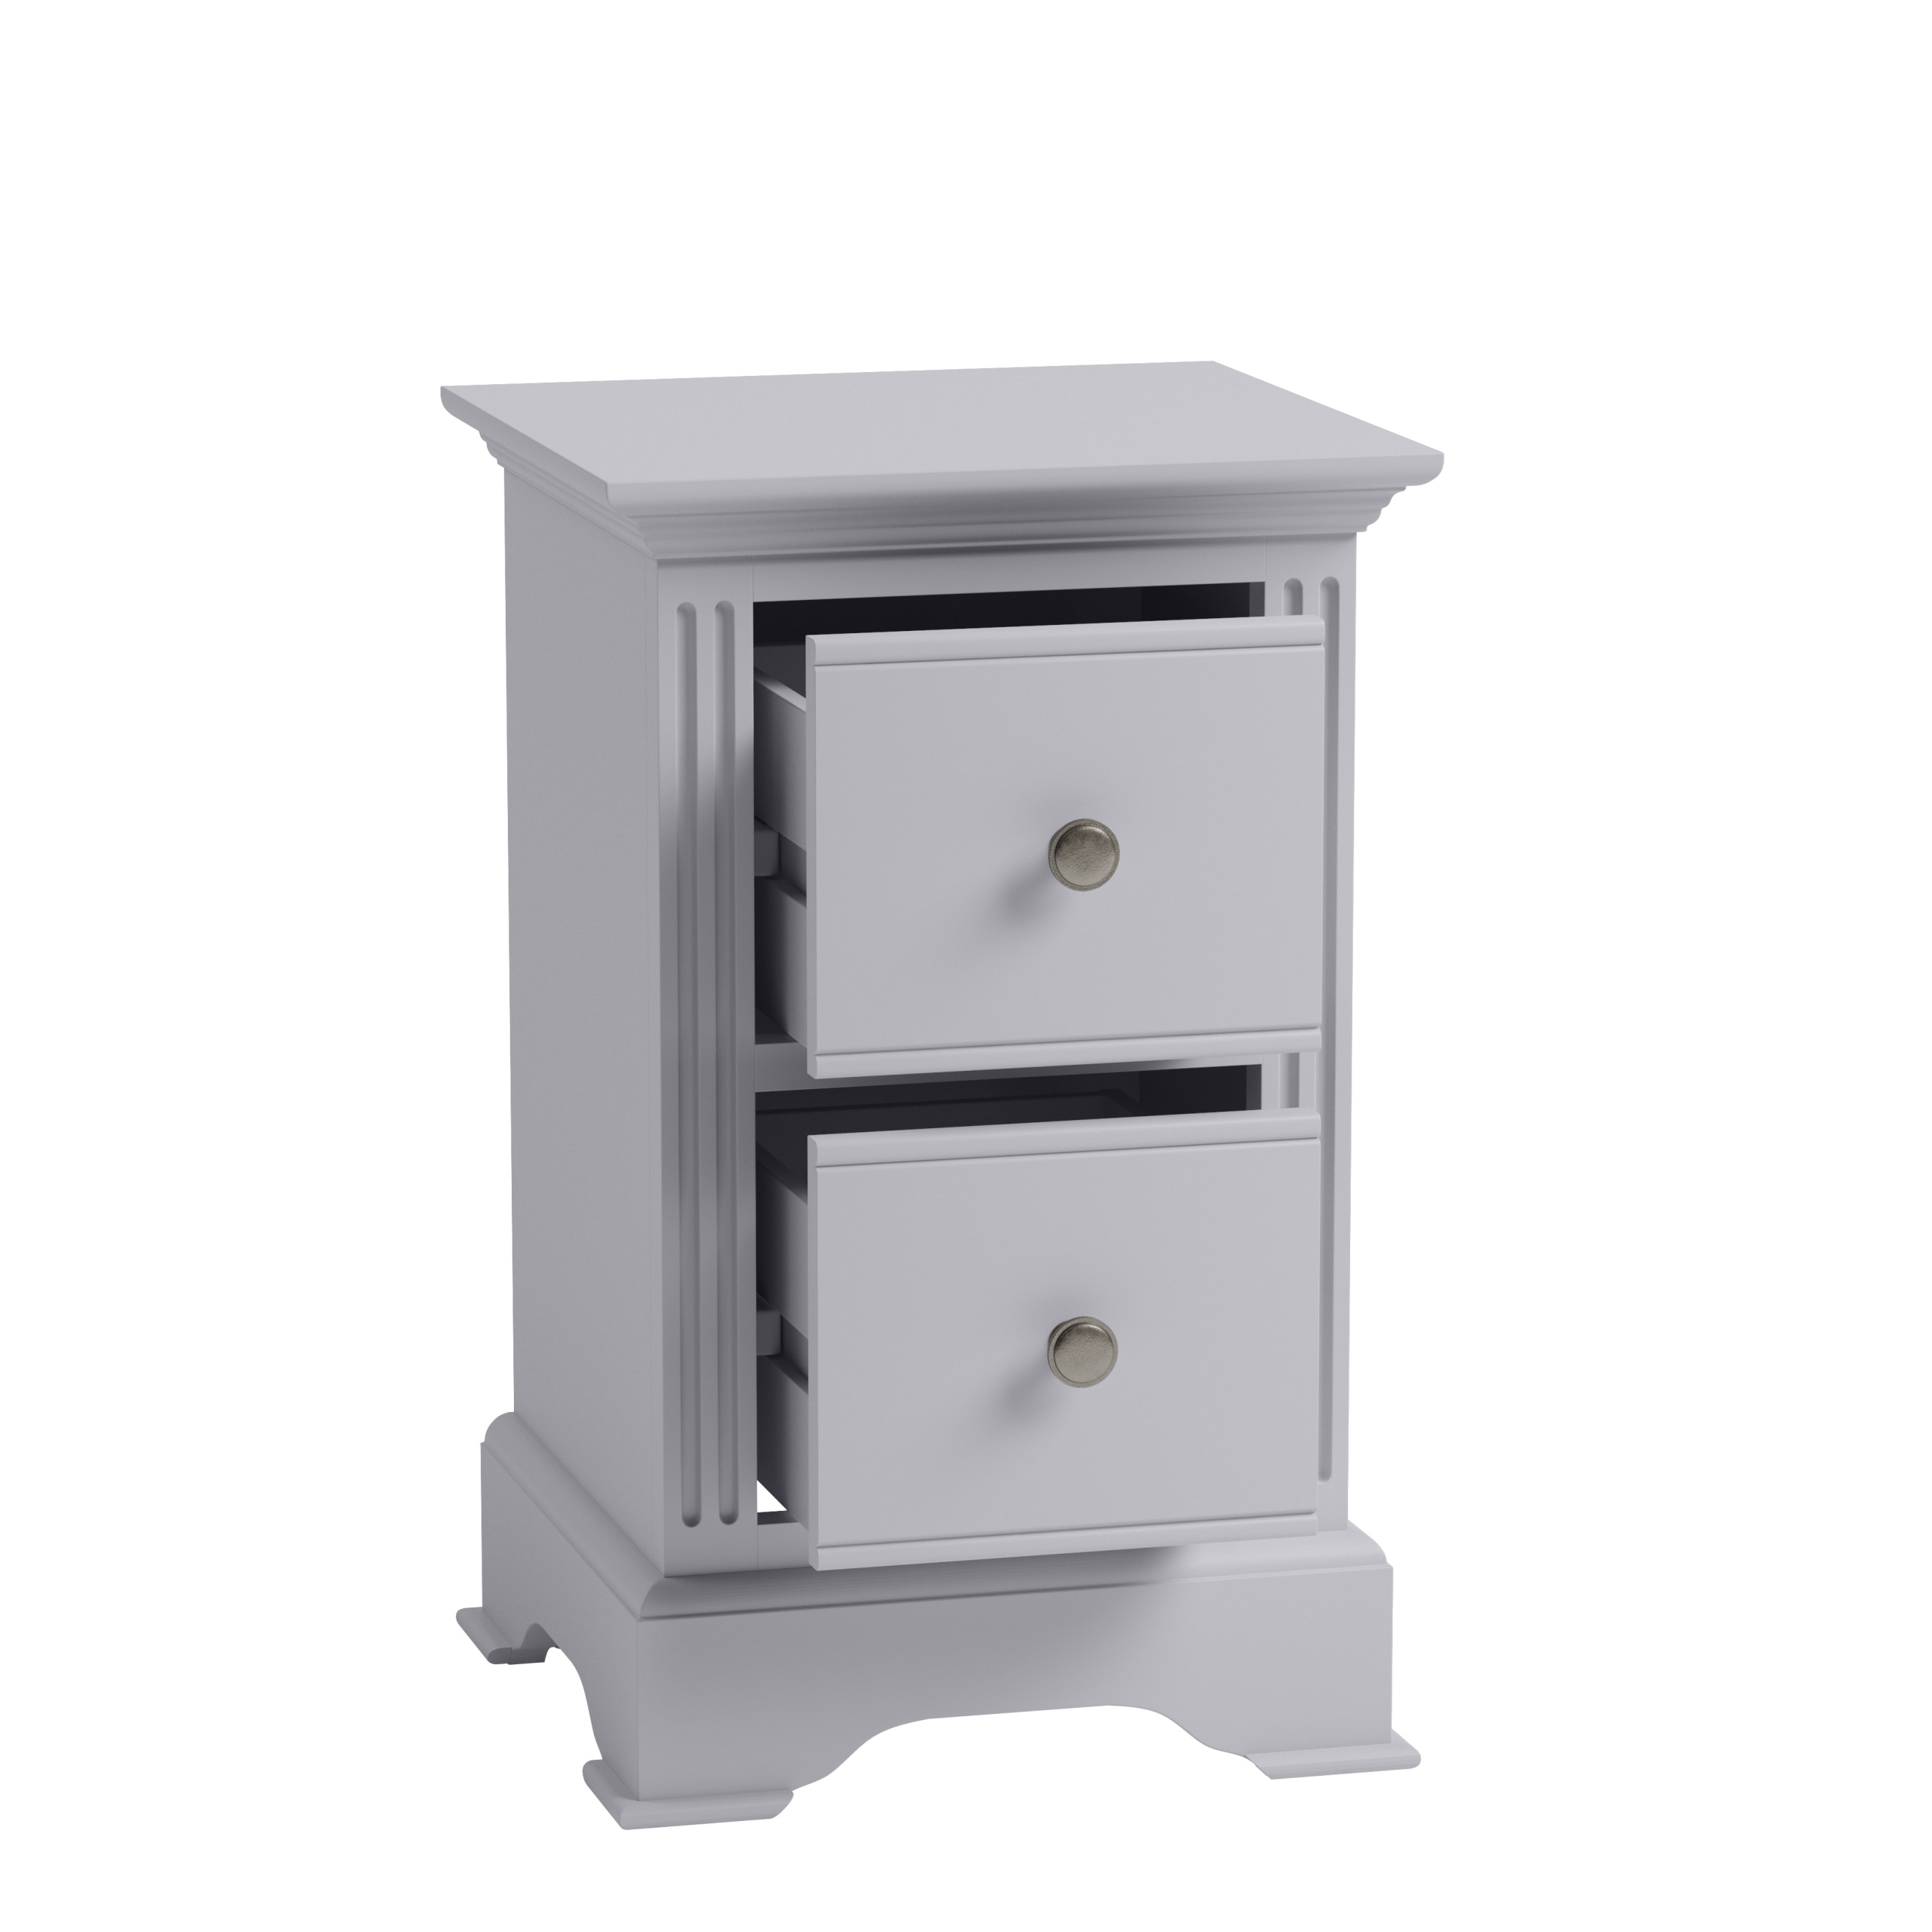 BROMPTON PAINTED SOFT GREY - SMALL 2 DRAWER BEDSIDE CABINET